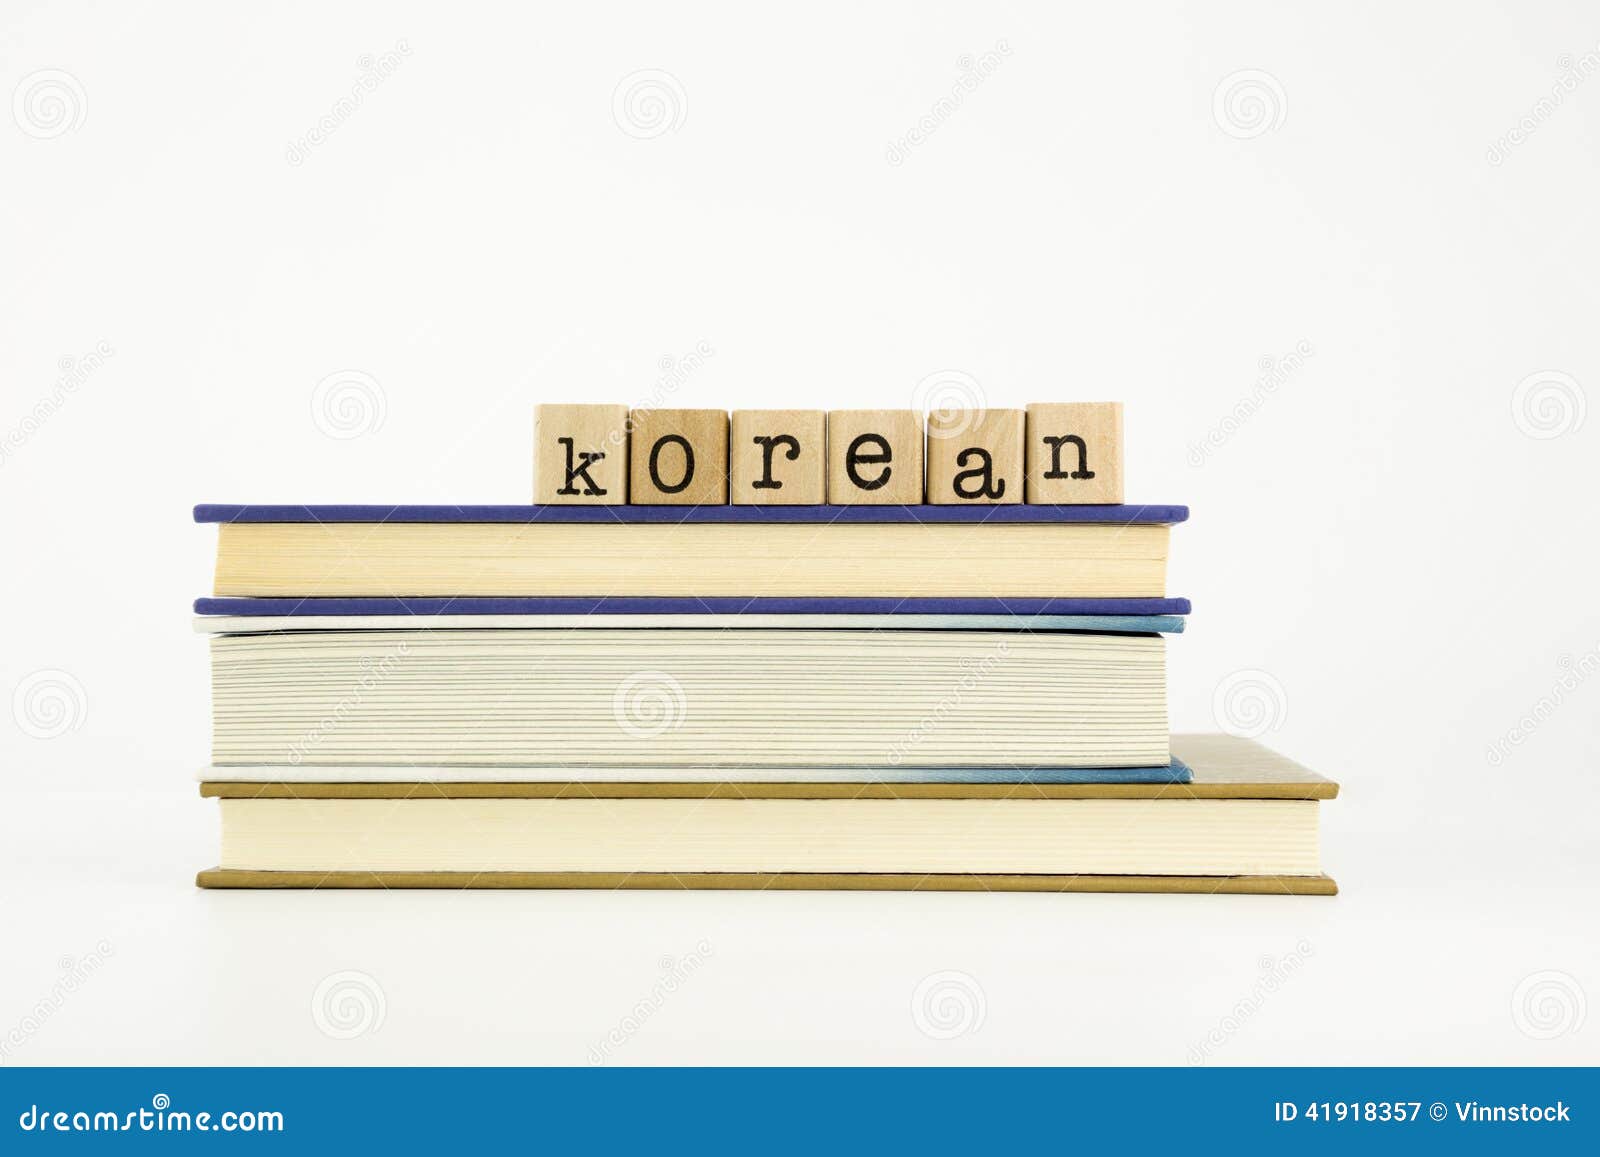 korean language word on wood stamps and books